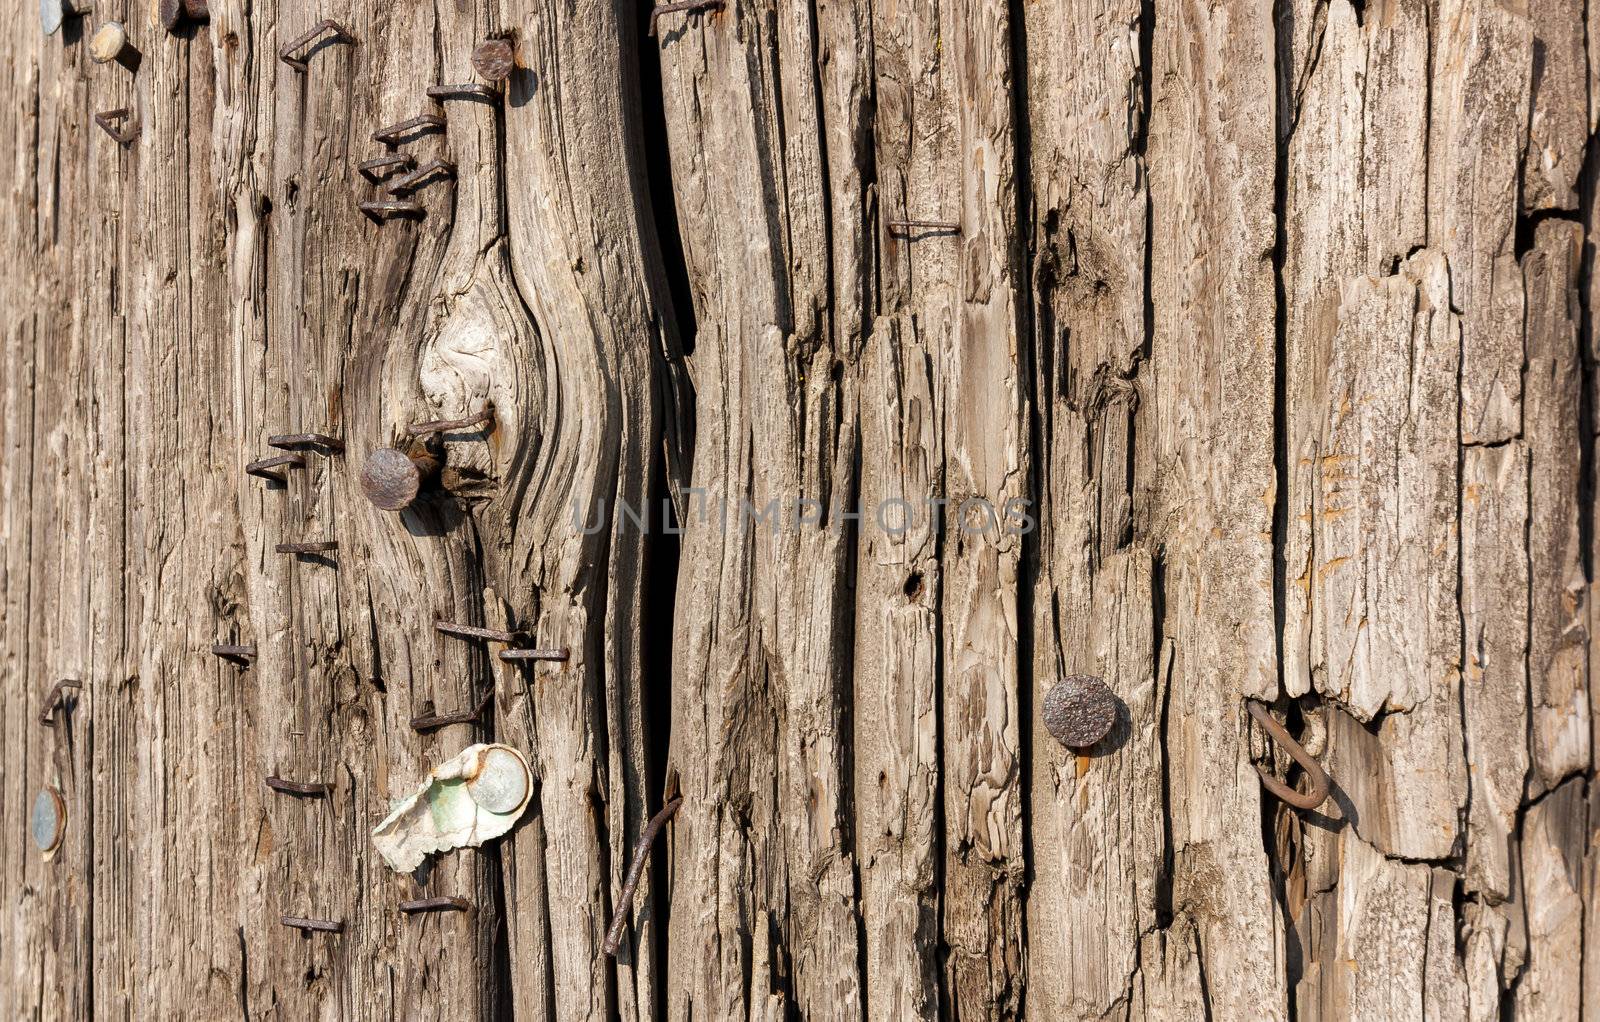 Worn Telephone Pole Texture and Background by wolterk